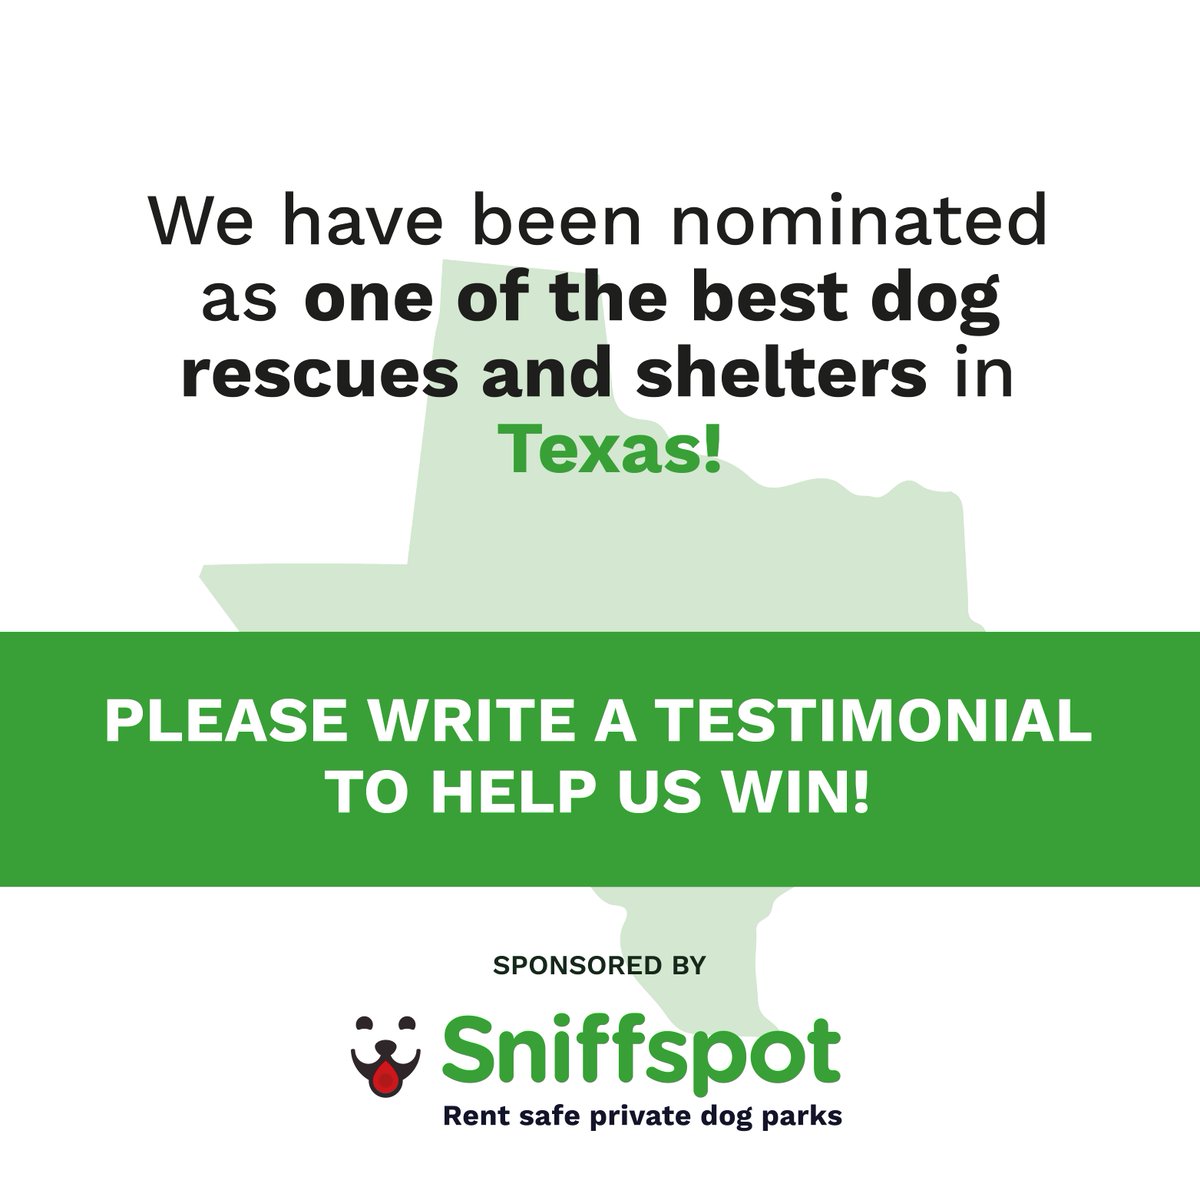 🏆 Fort Worth Animal Care & Control has been nominated as one of the best shelters in Texas! Help us by filling out a quick testimonial (link below) to show your support for FWACC. The more testimonials we get, the higher we rank ! loom.ly/aJlD-wA